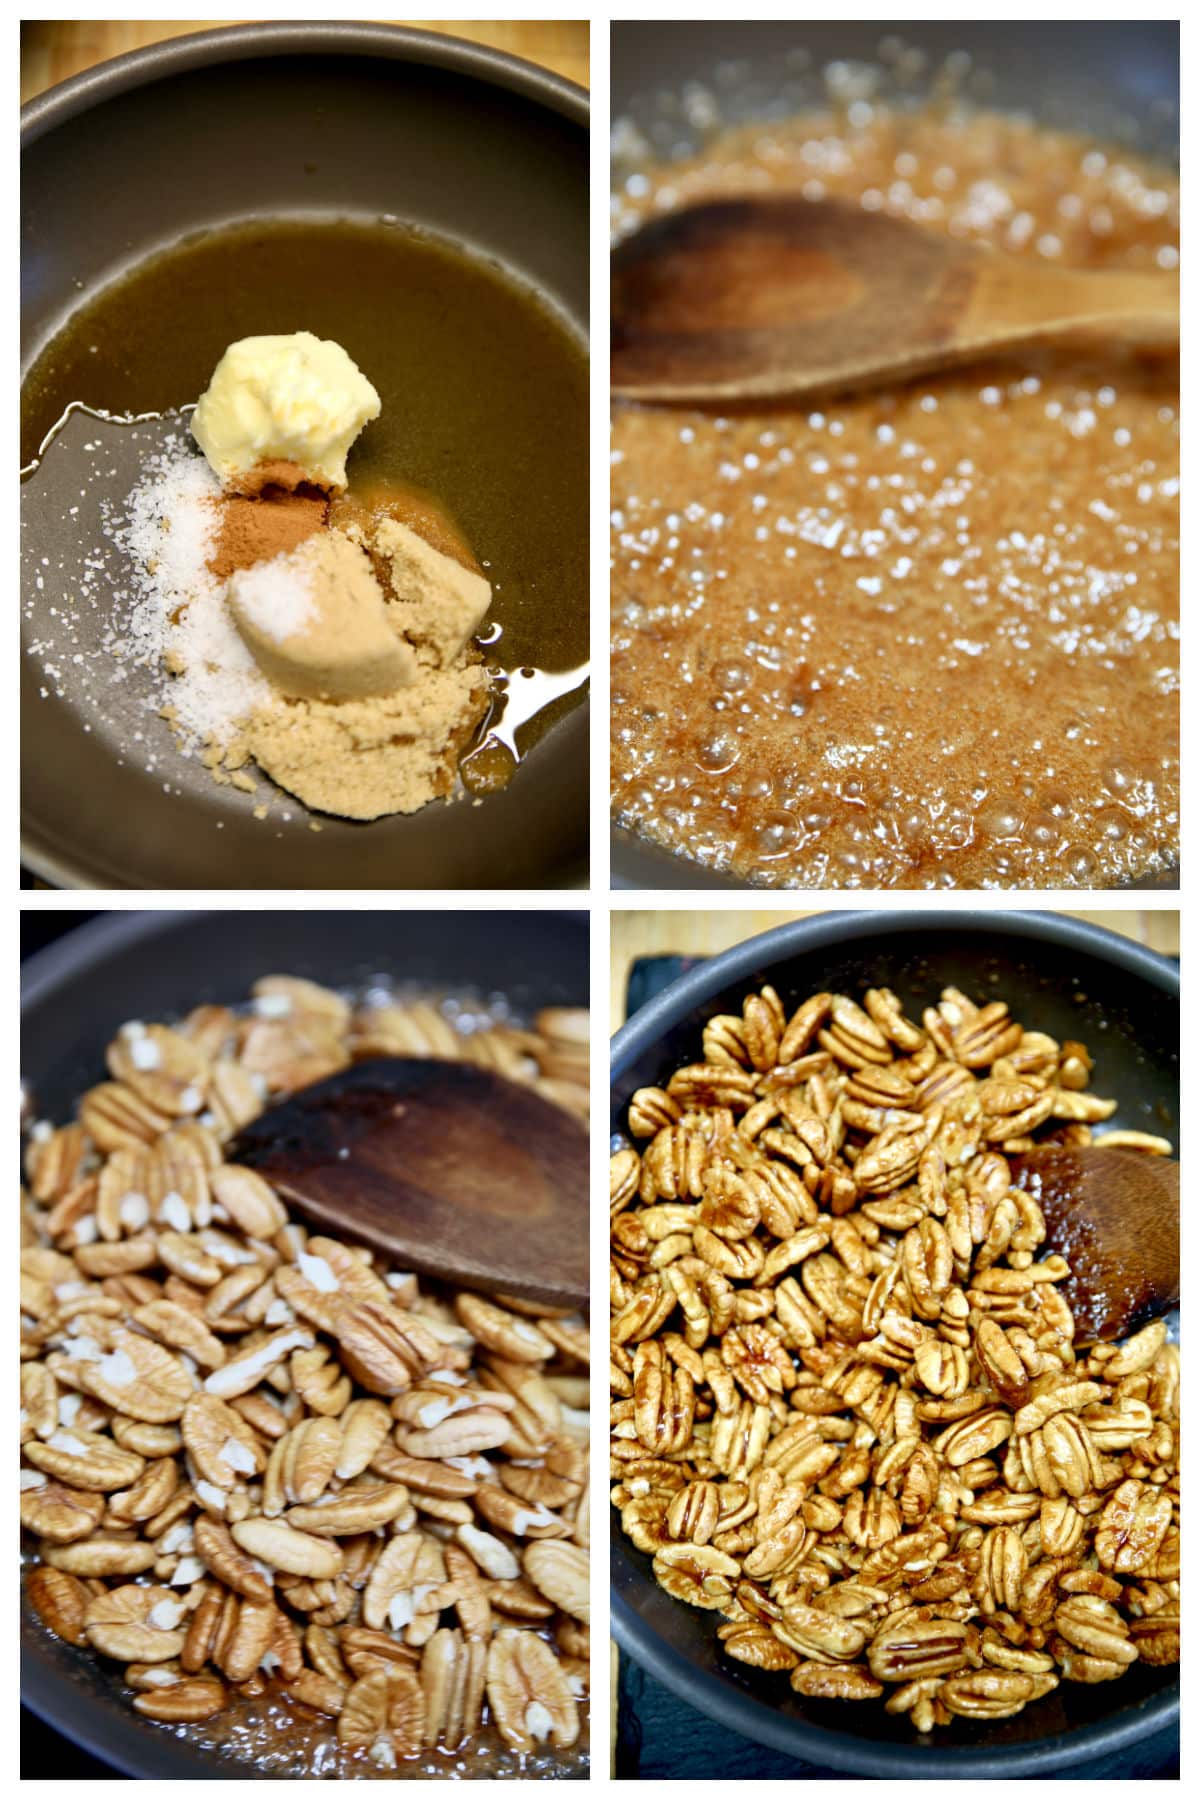 Collage: brown sugar, butter in a pan, making syrup, adding pecans.